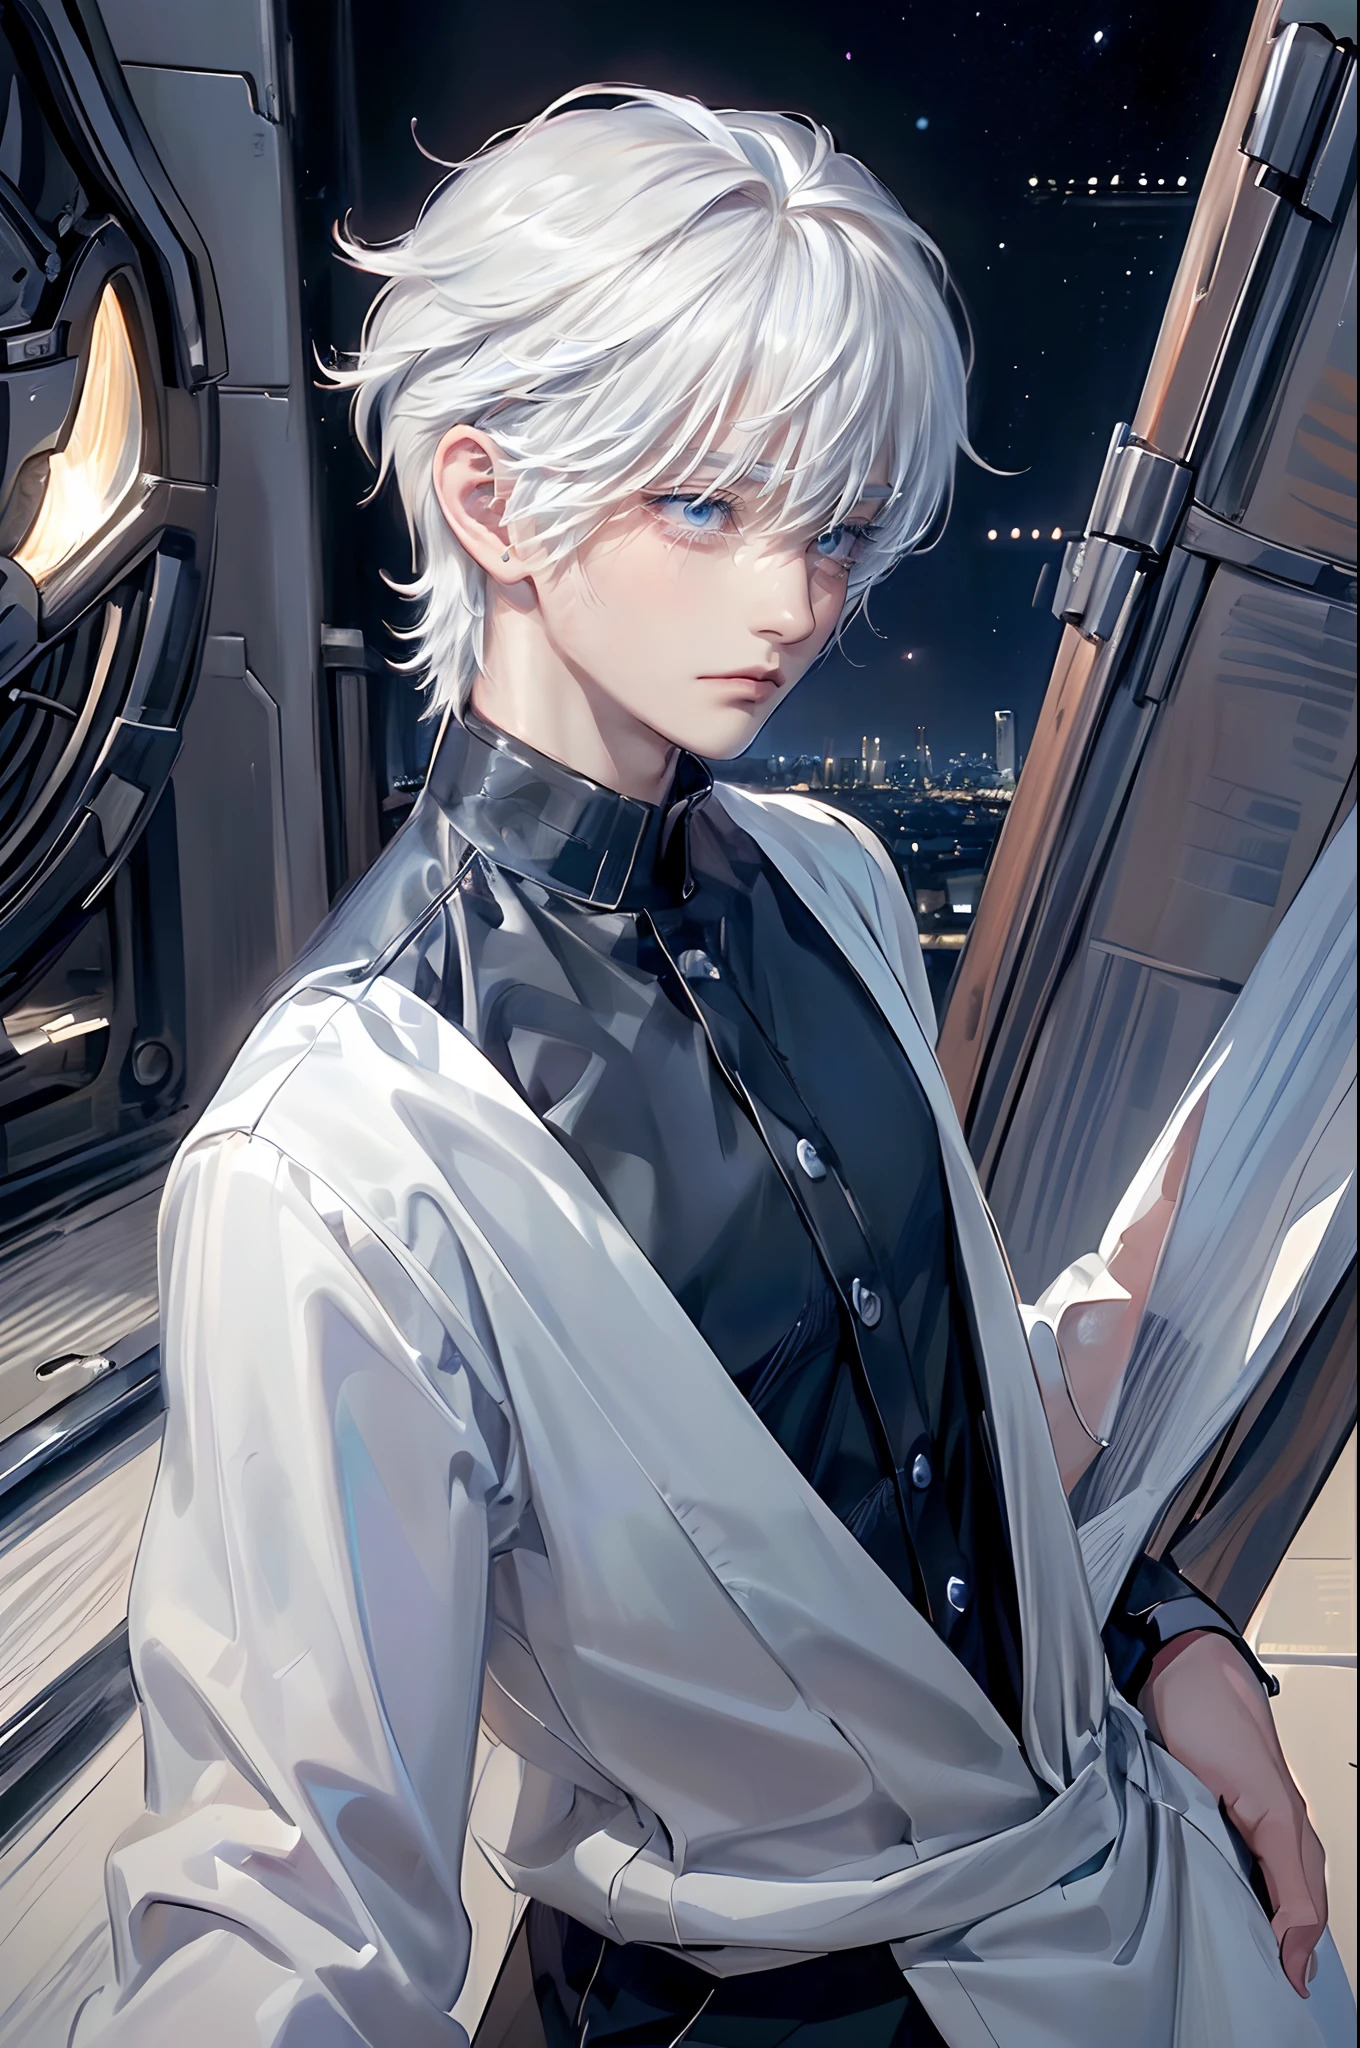 ((4K works))、​masterpiece、(top-quality)、One beautiful boy、Slim body、tall、((Black Y-shirt and white pants、Charming British knight style))、Please wear one jacket、(Detailed beautiful eyes)、Fantastic Night City、((City under the stars))、Fantastic city at midnight、((Face similar to Carly Rae Jepsen))、((Short-haired white hair))、((Smaller face))、((Neutral face))、((Bright blue eyes))、((American adult male))、((Adult male 26 years old))、((Cool Men))、((Like a celebrity))、((Crying expression))、((sad look))、((Korean Makeup))、((elongated and sharp eyes))、((Happy dating))、((boyish))、((Upper body photography))、Professional Photos、((Shot alone))、((She is looking up at the sky under the roof))、((Shot from the side))、((Crying profile))、((Face crying in pain))、((He is looking upwards))、((His eyes are looking down))、((He stands next to the viewer))、((He who cries))、I'm crying on a stick.、Man crying while standing、Solitude、saddened、desolate、suffocating、heartbreaking、auw、agony、Tears dripping on the cheeks